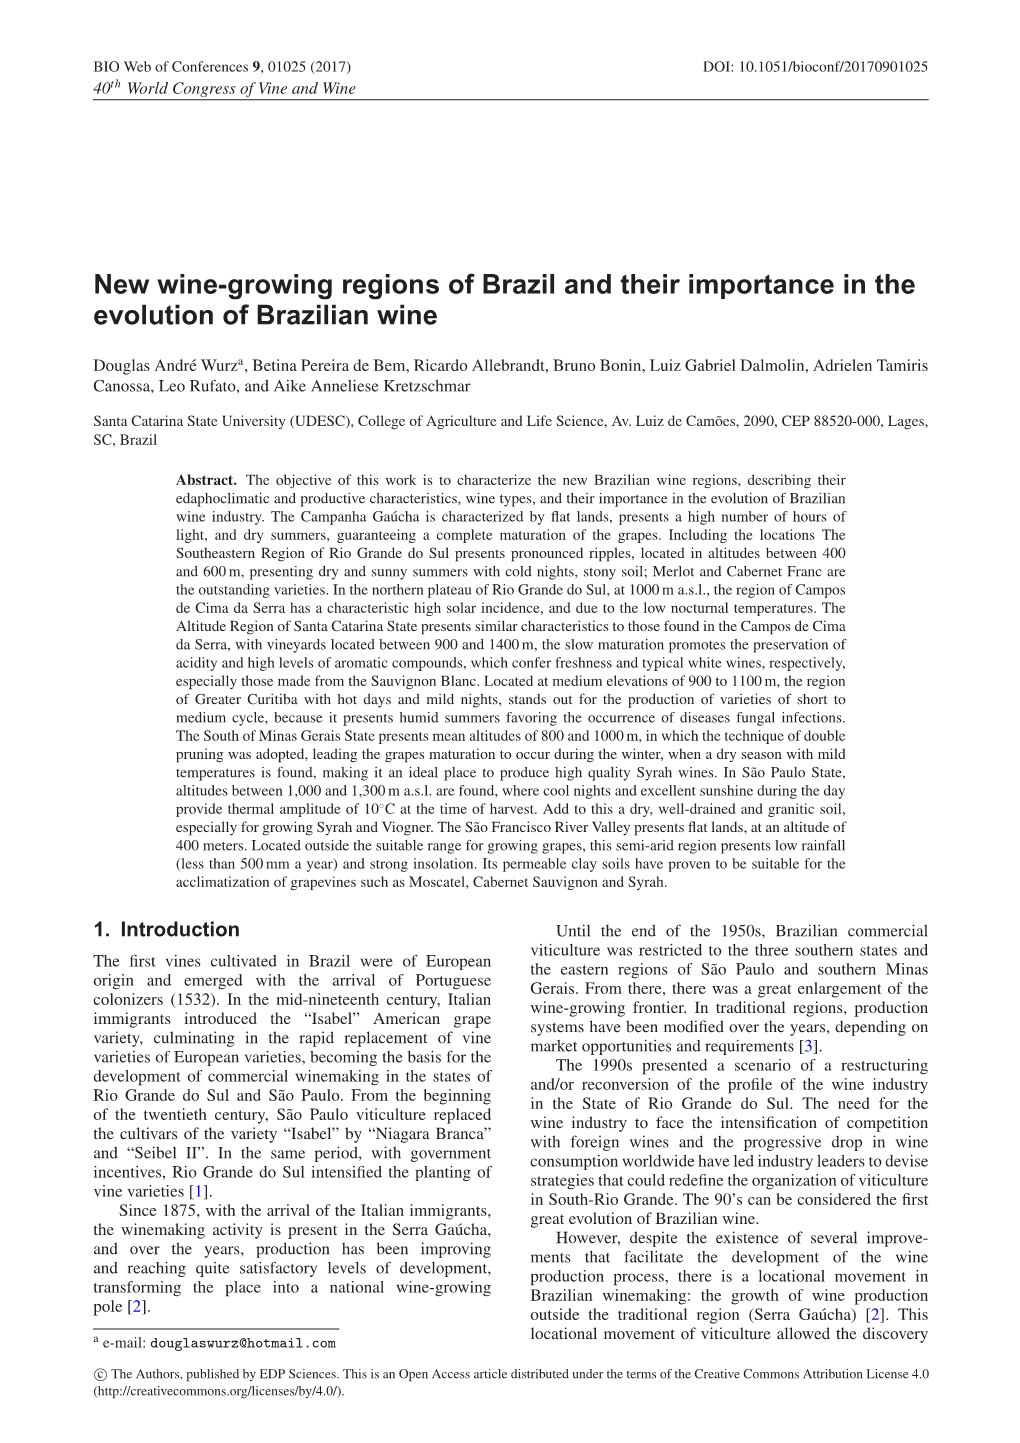 New Wine-Growing Regions of Brazil and Their Importance in the Evolution of Brazilian Wine